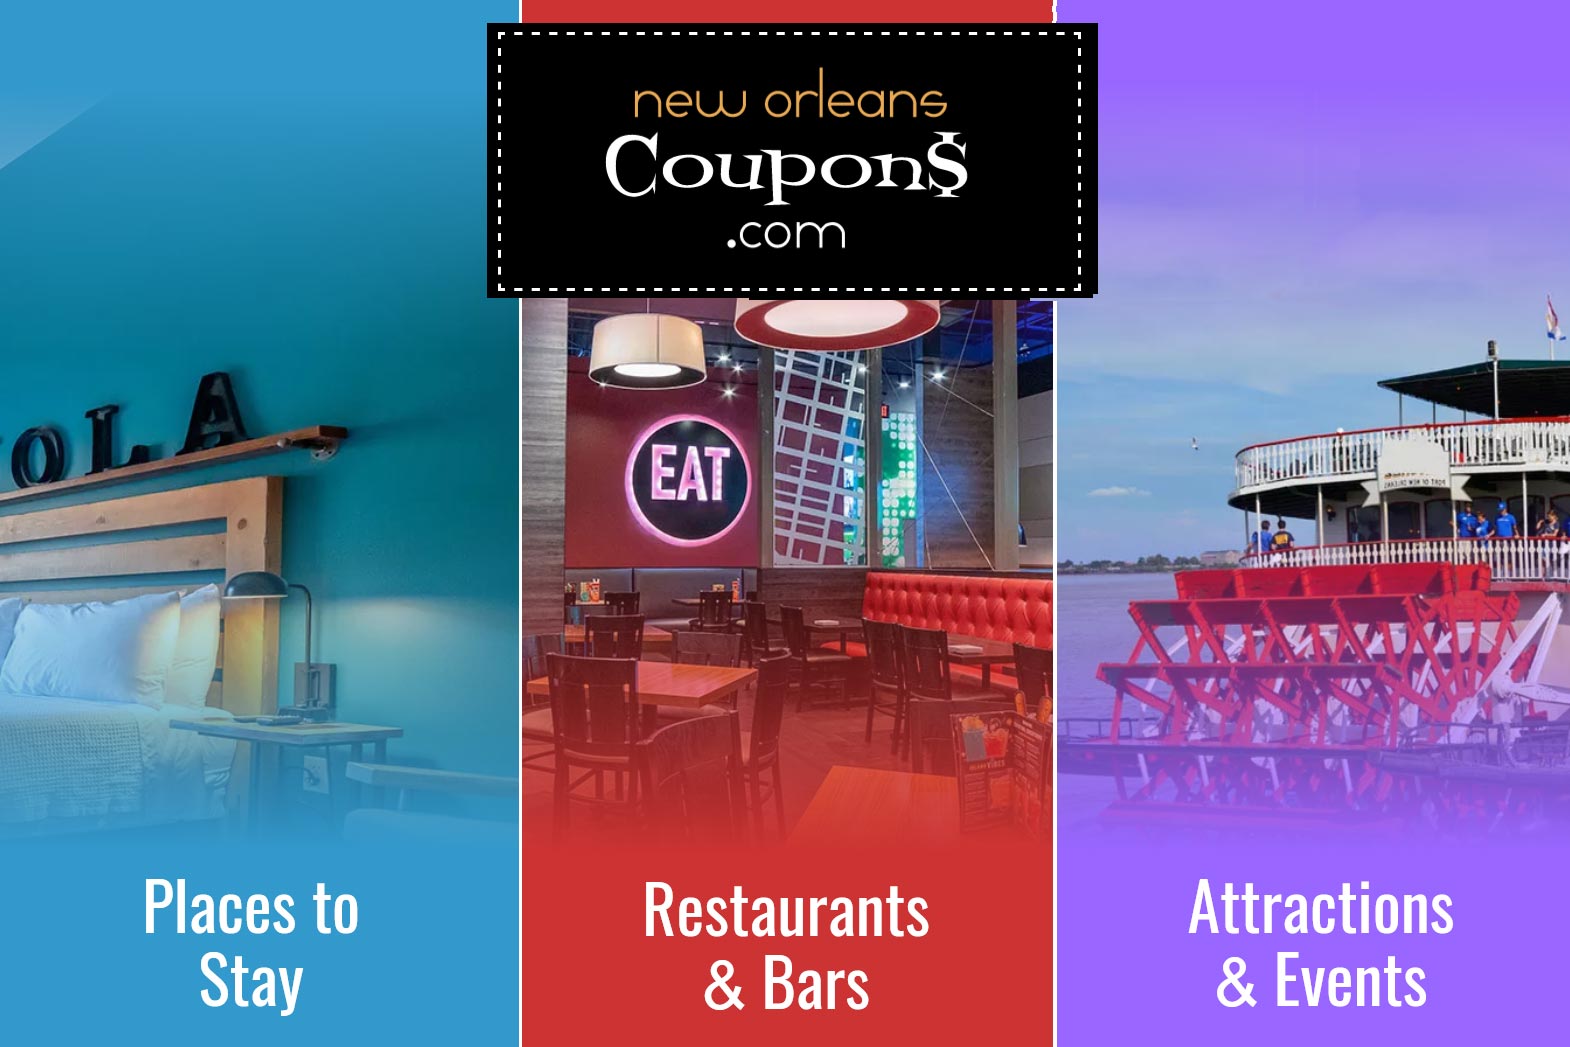 Visit New Orleans Coupons for the best deals and promotions!